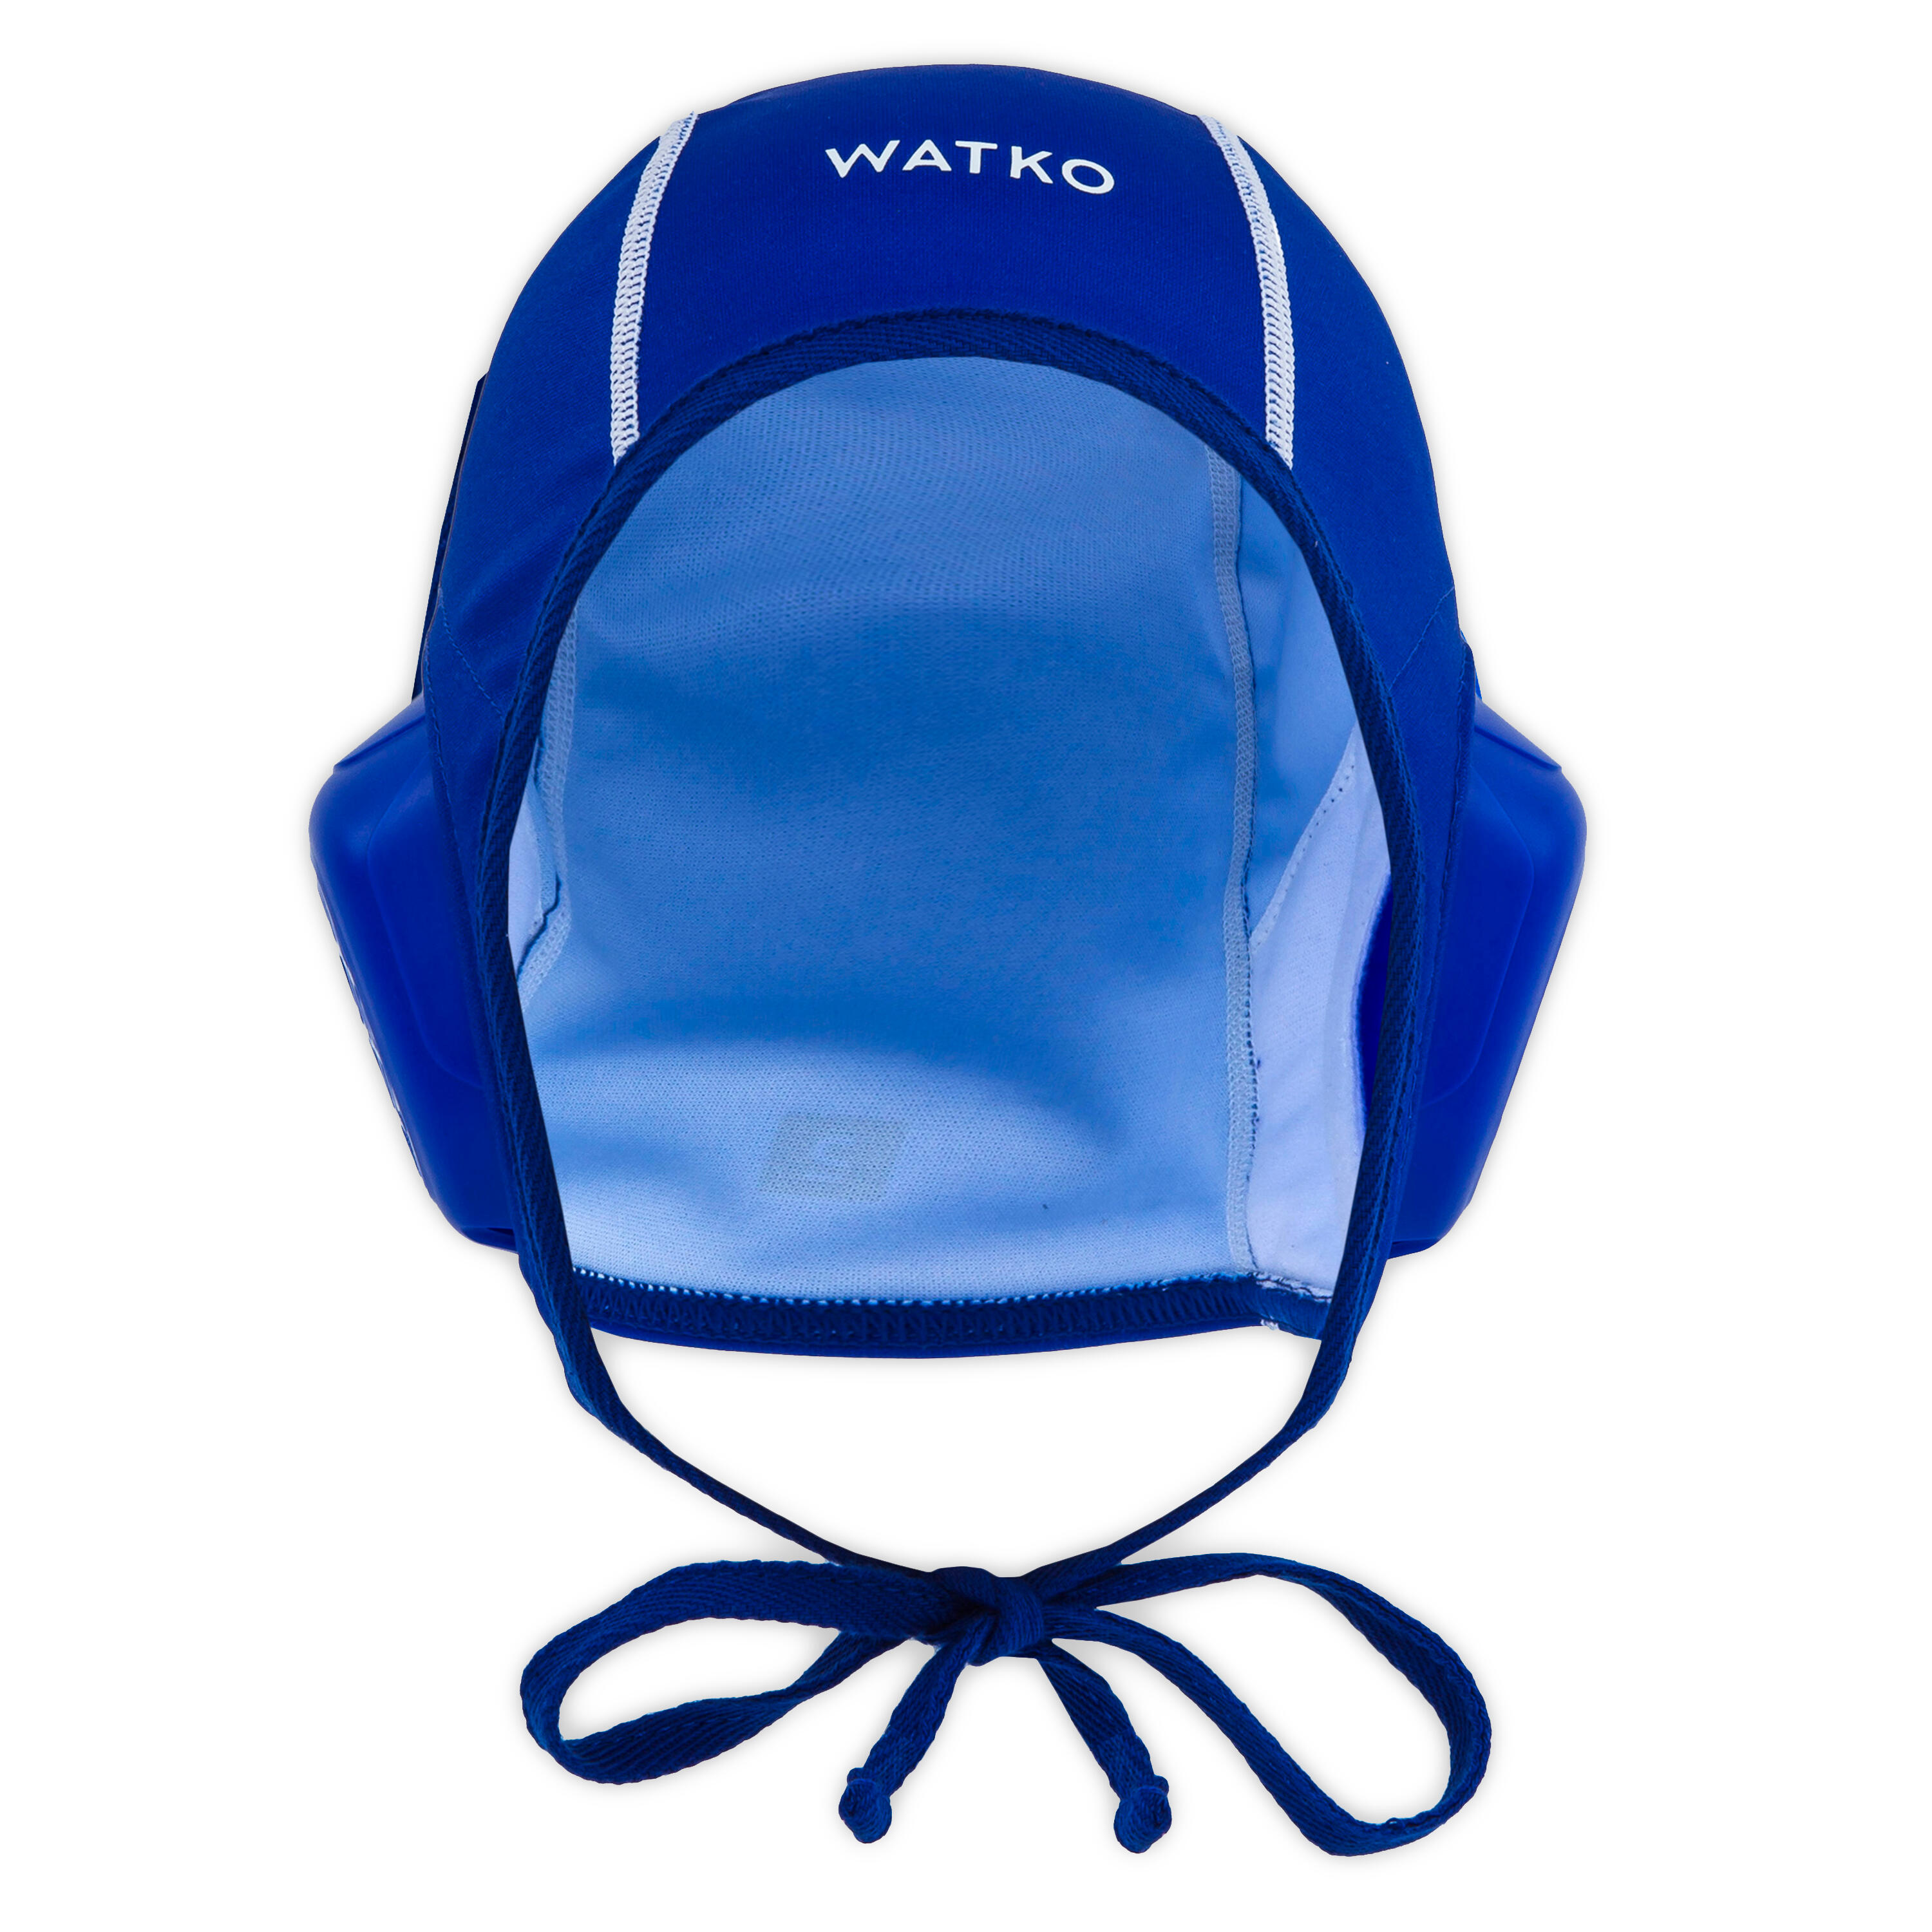 ADULT SET OF 16 CAPS FOR WATER POLO WP900 BLUE 4/7